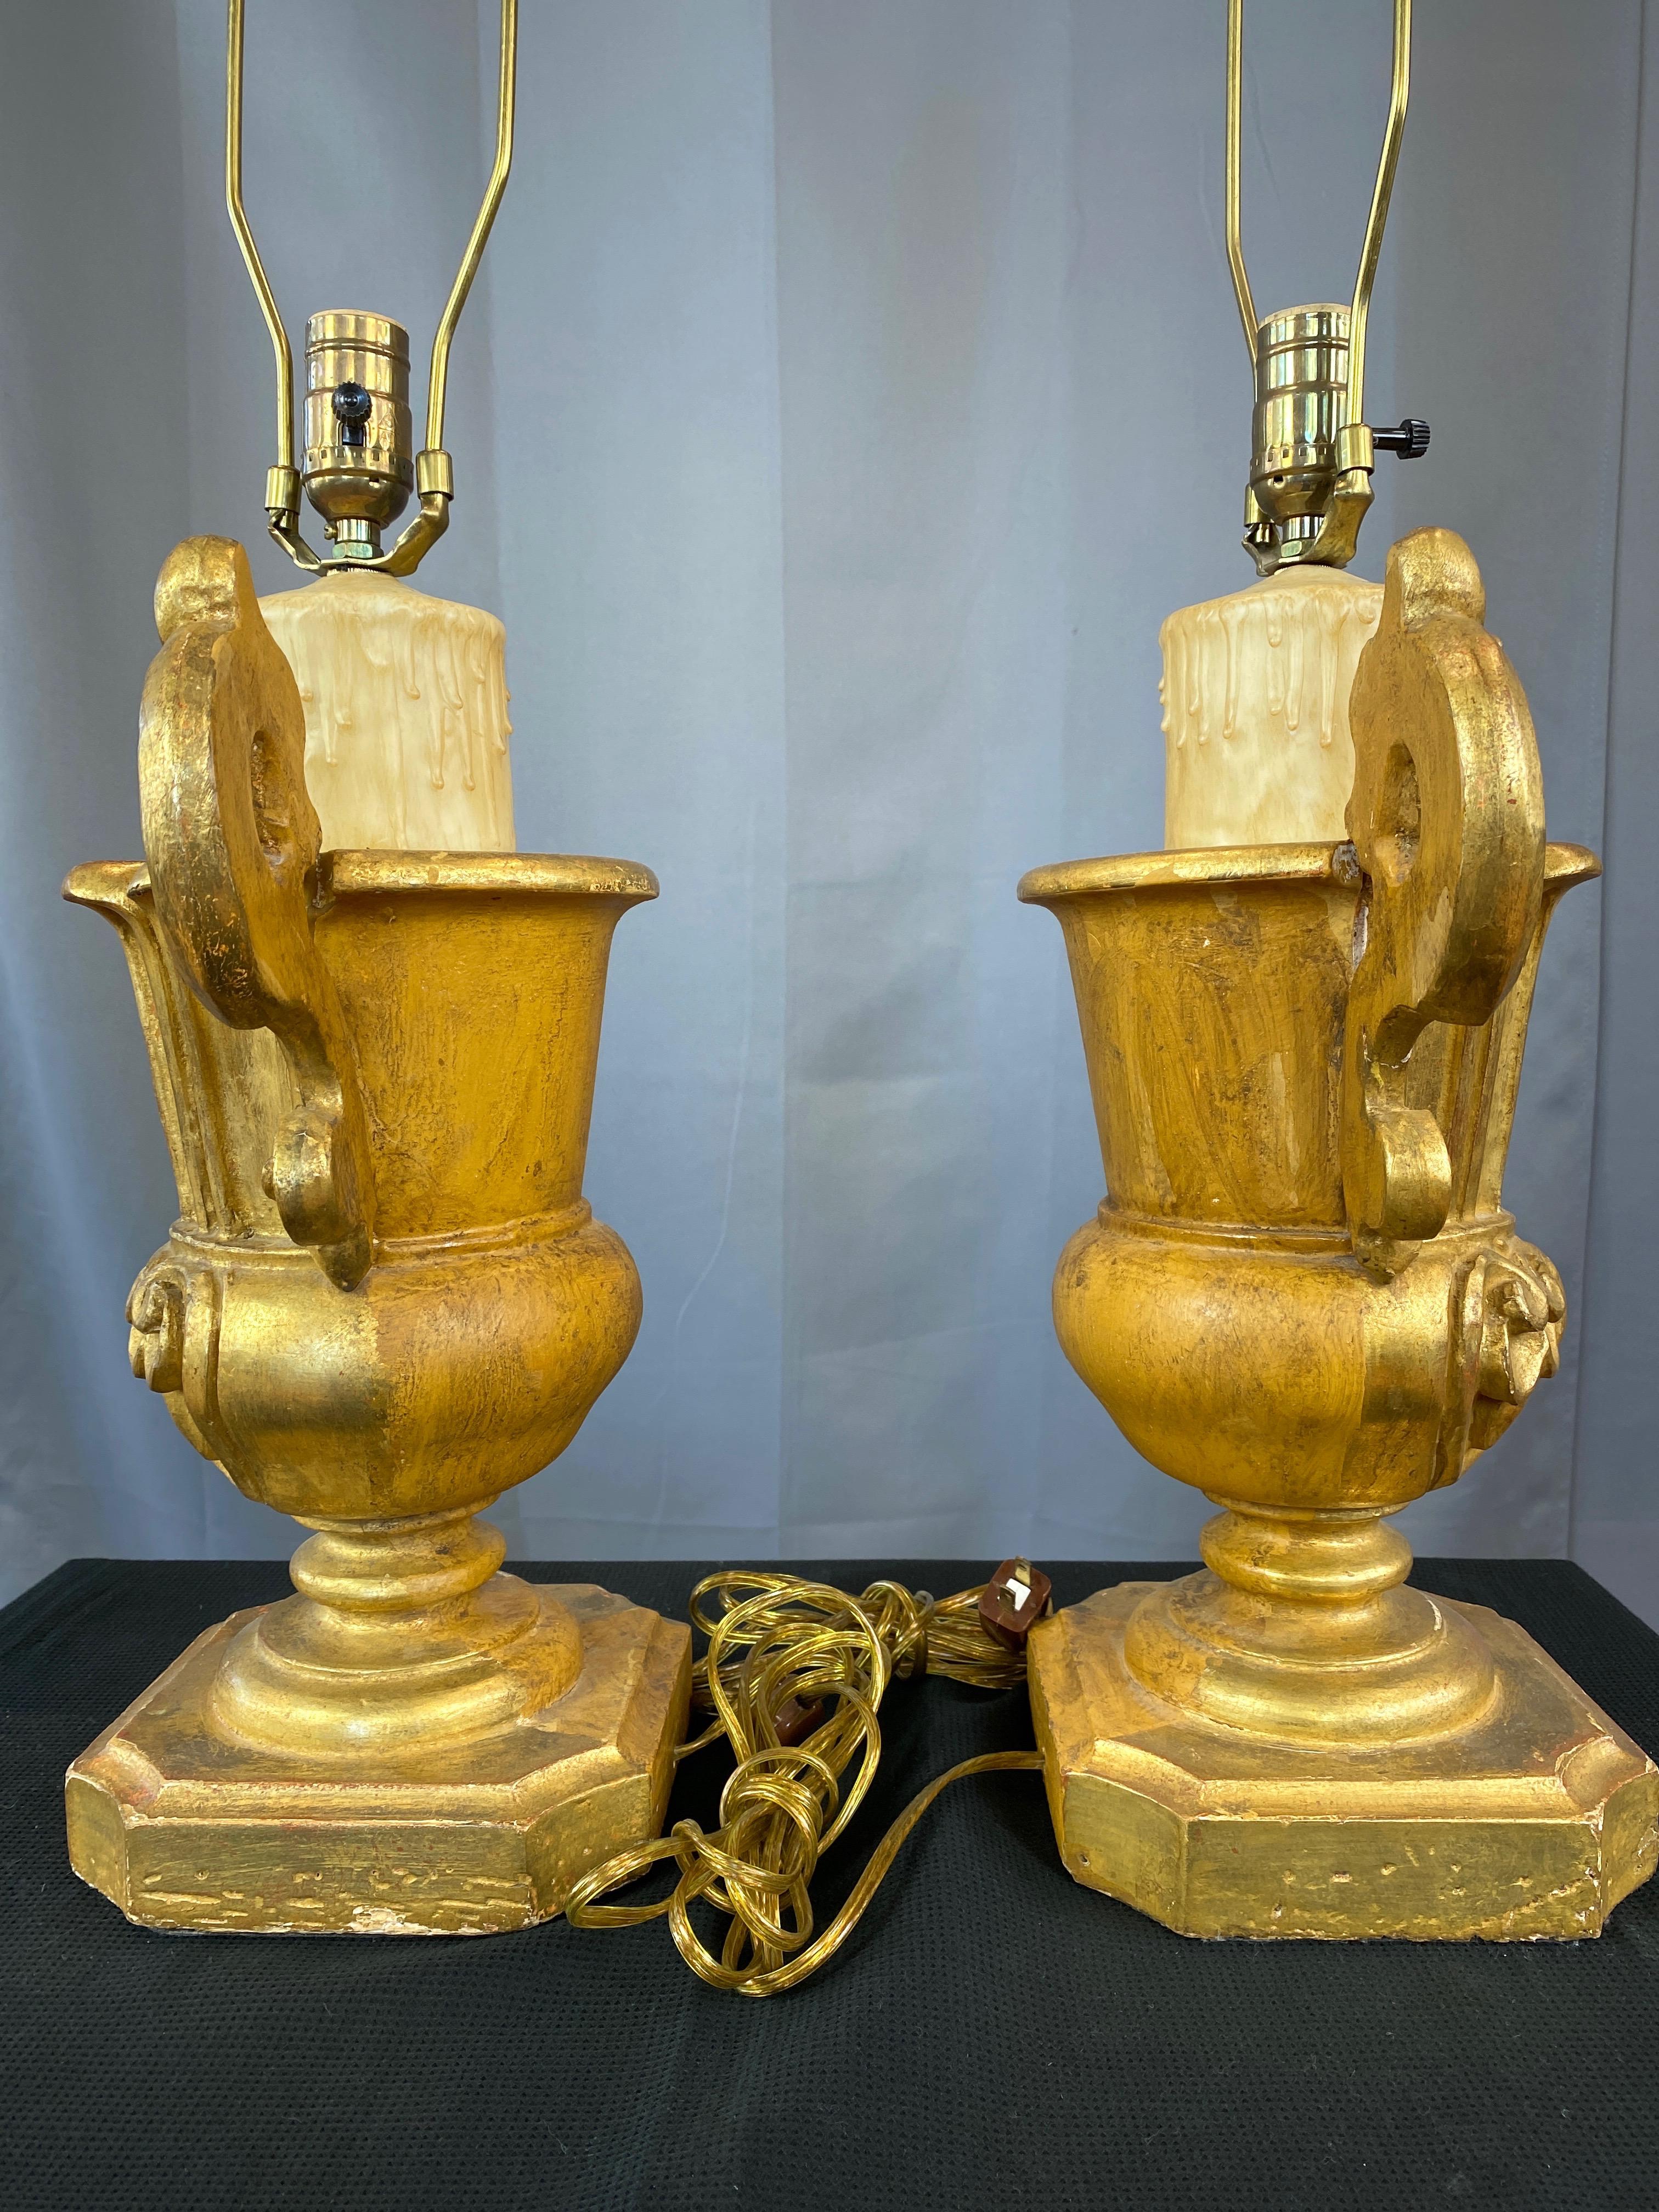 Pair of Italian Baroque Revival Giltwood Urn and Faux Candle Table Lamps, 1930s For Sale 1